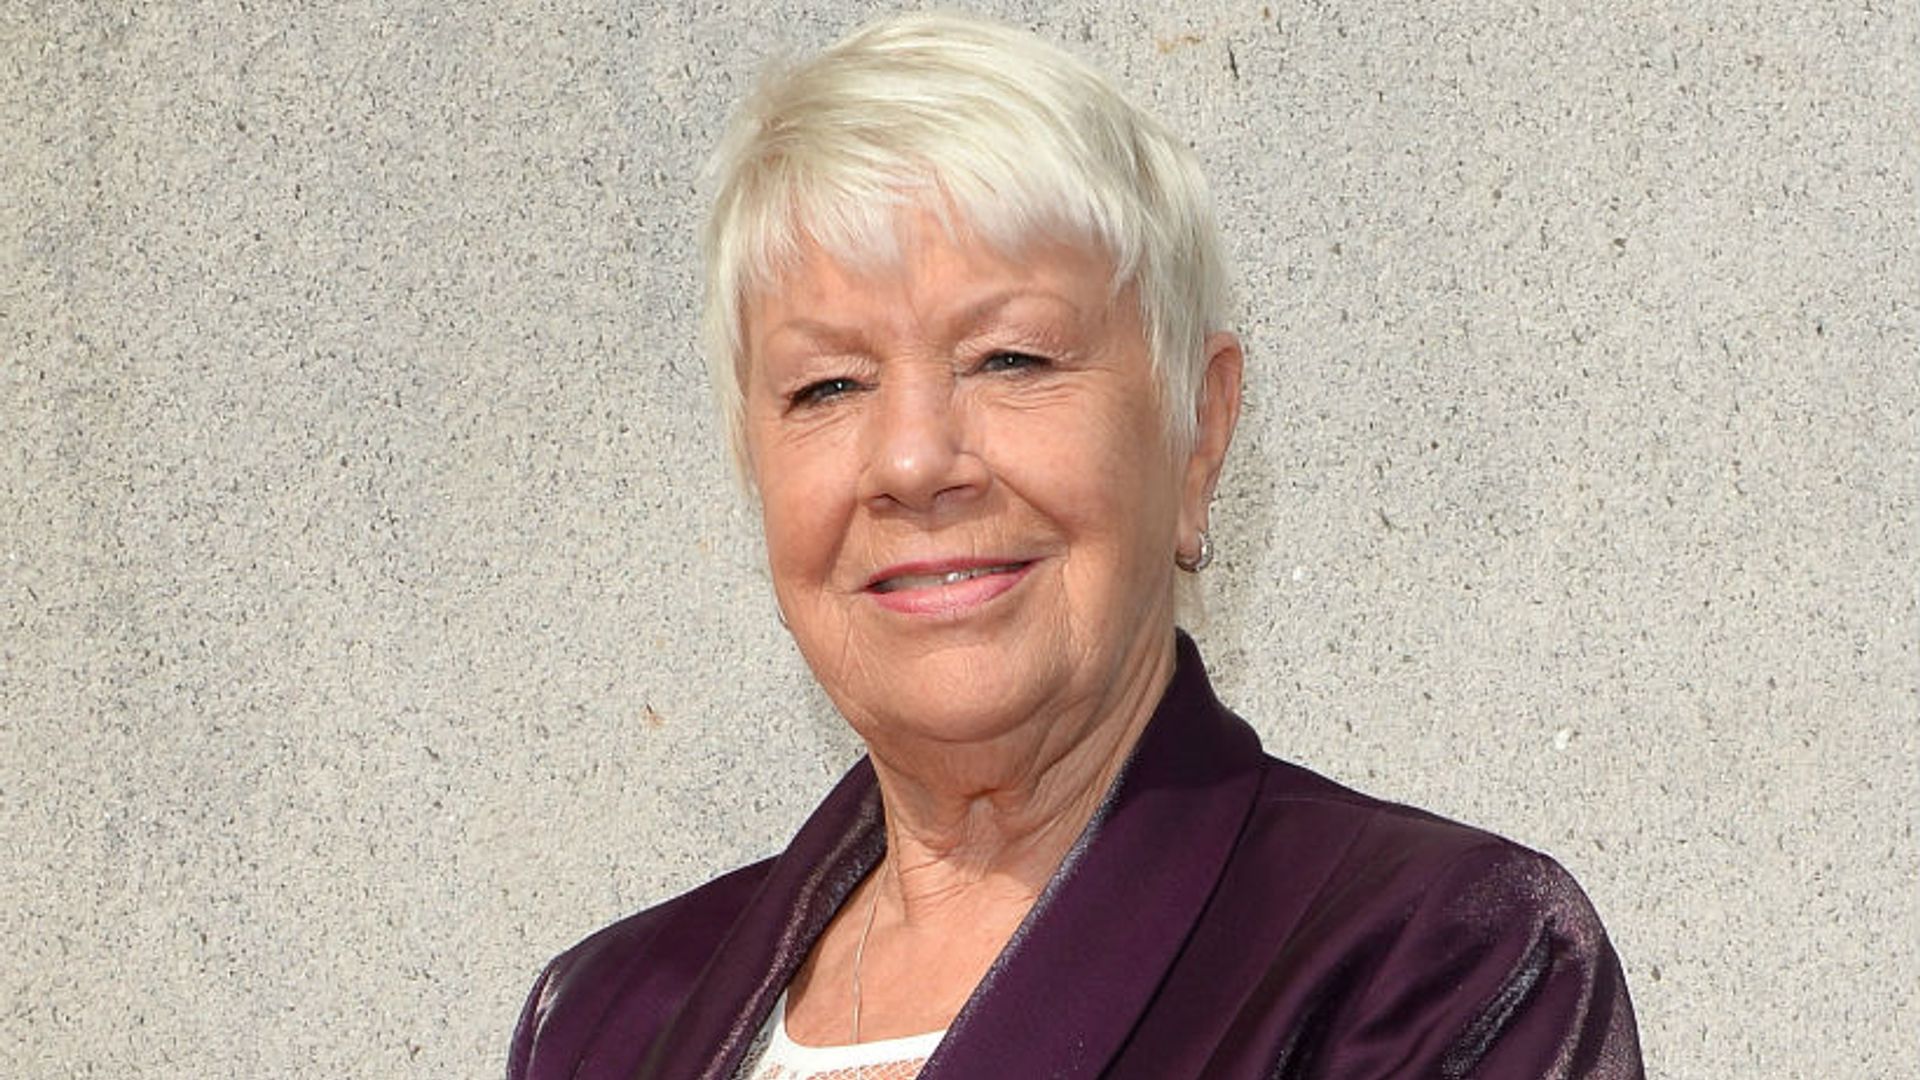 EastEnders' Laila Morse aka Big Mo reveals health scare that made her quit smoking